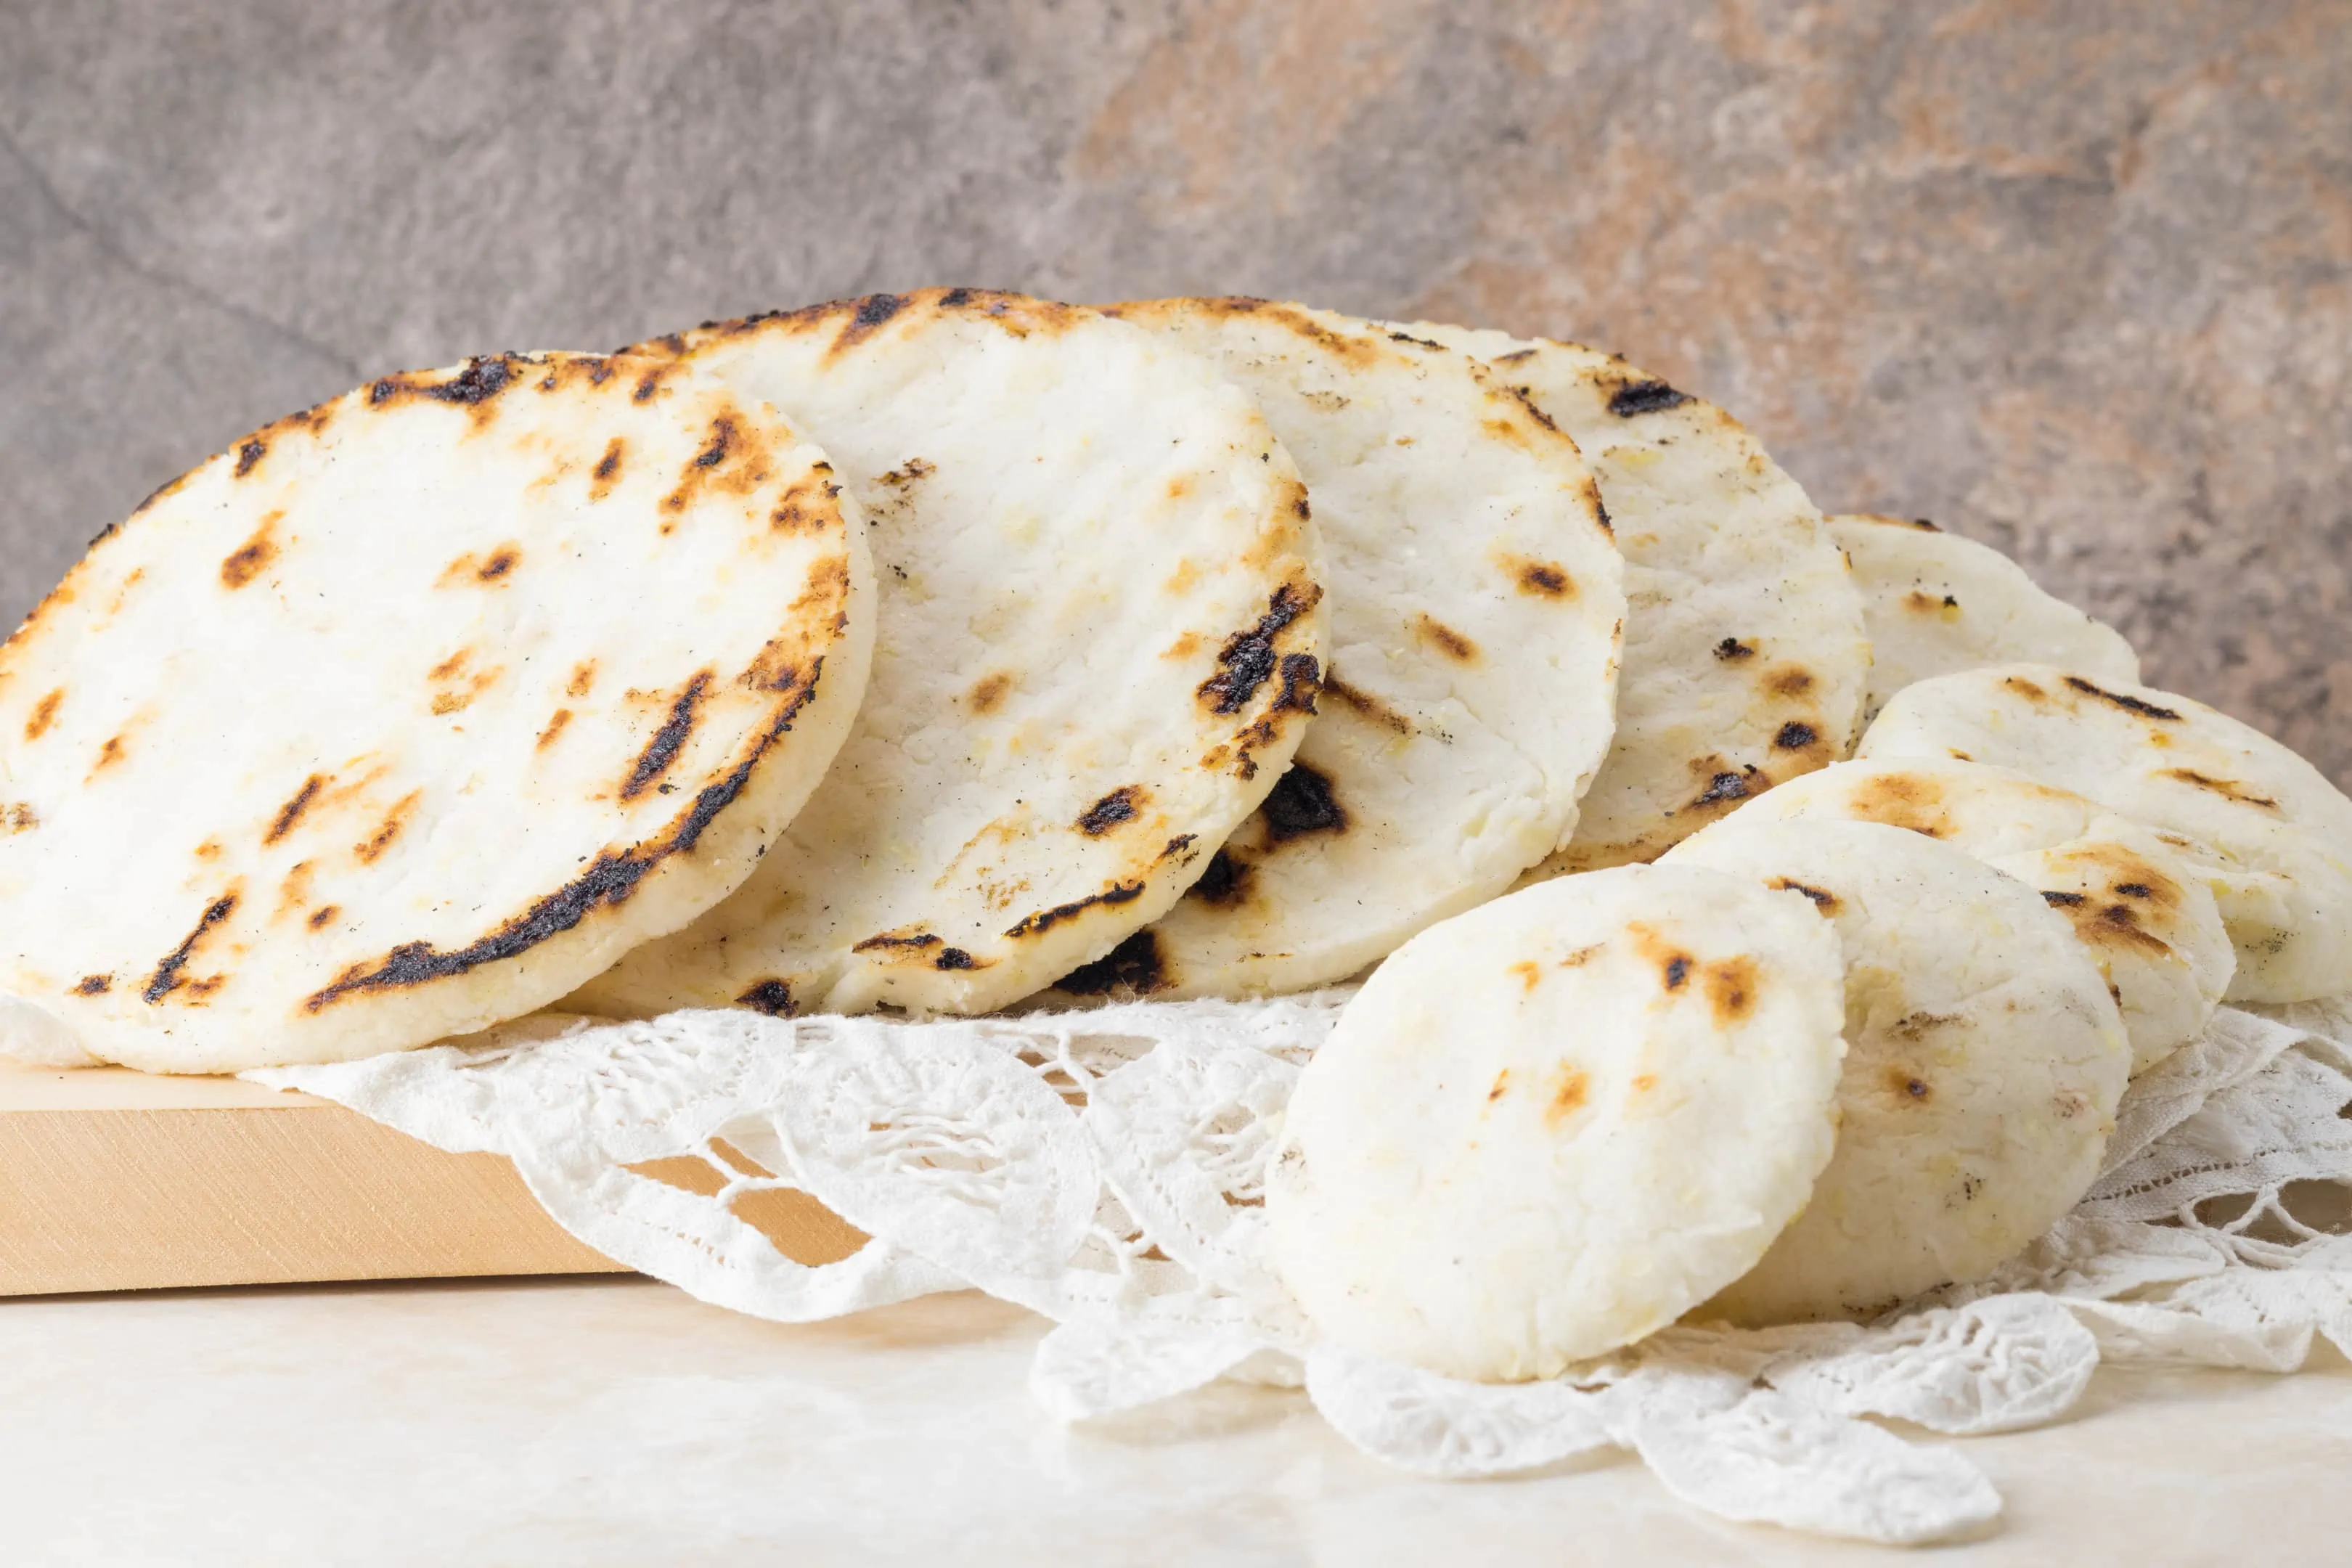 Tasty arepas con queso recipe in different sizes